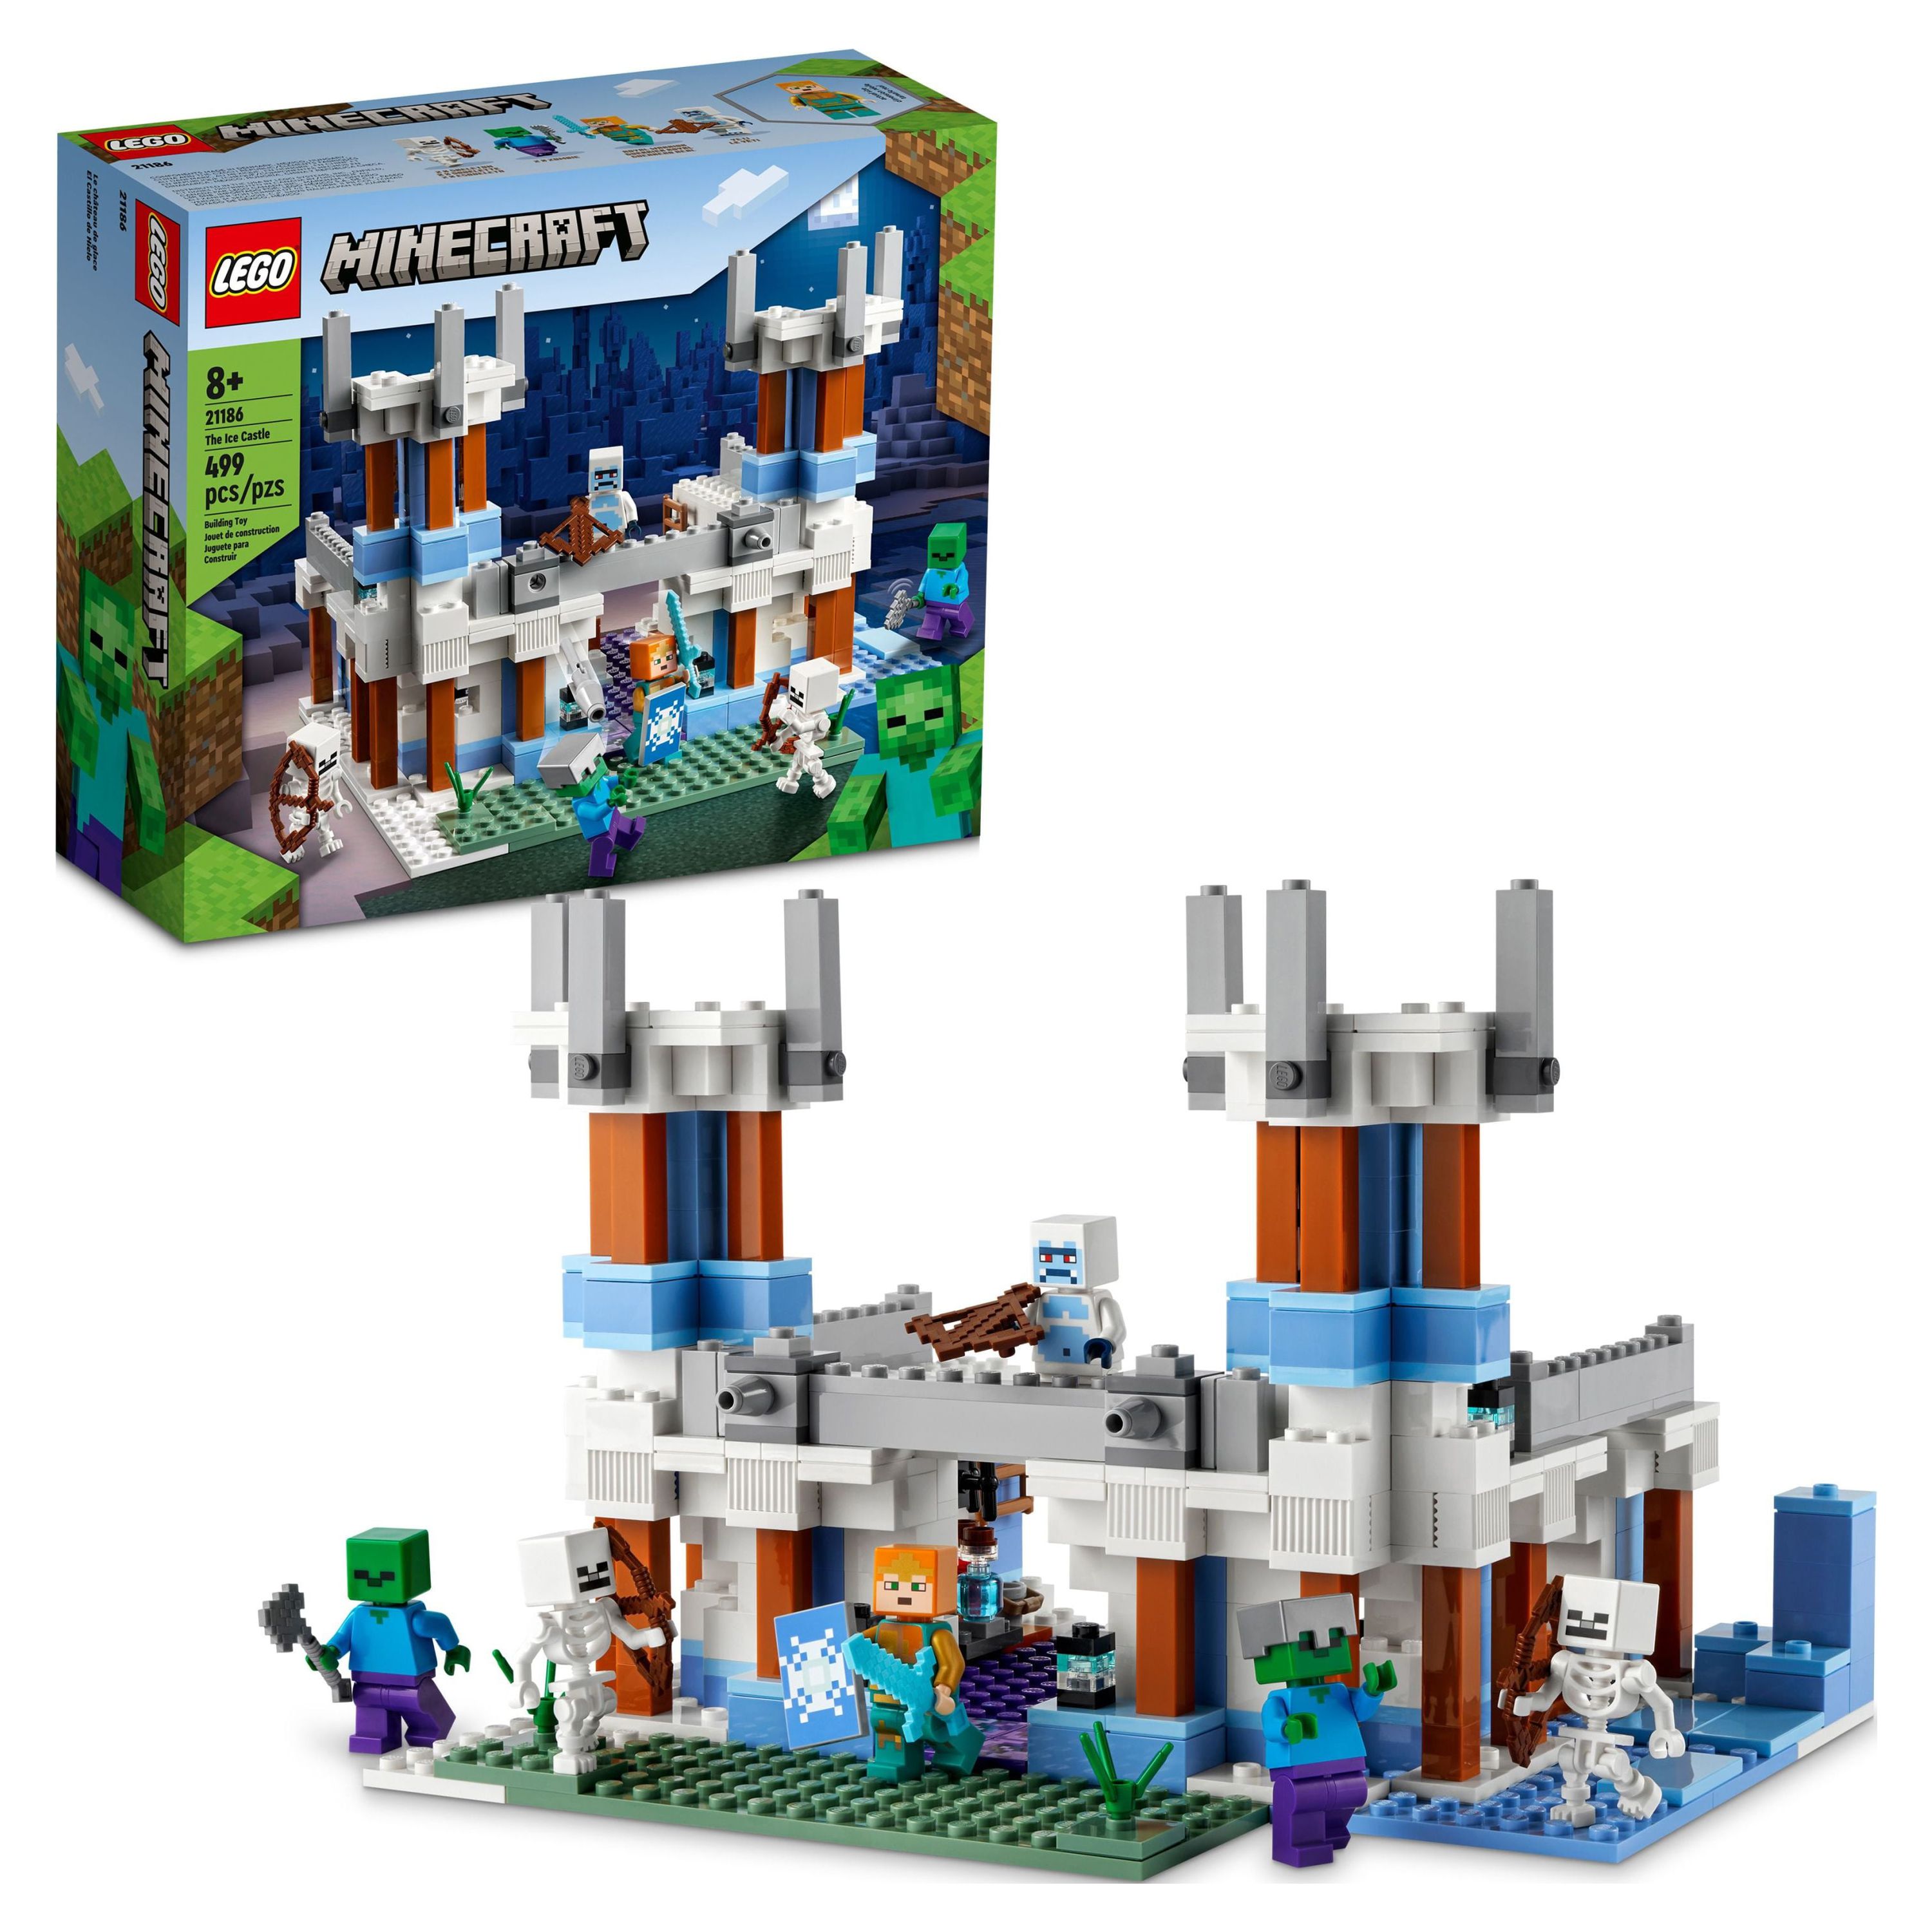 LEGO Minecraft The Ice Castle Toy with Zombie and Skeleton Mobs Figures, 21186 Birthday Gift Idea for Kids, Boys and Girls Ages 8 Plus - image 1 of 8